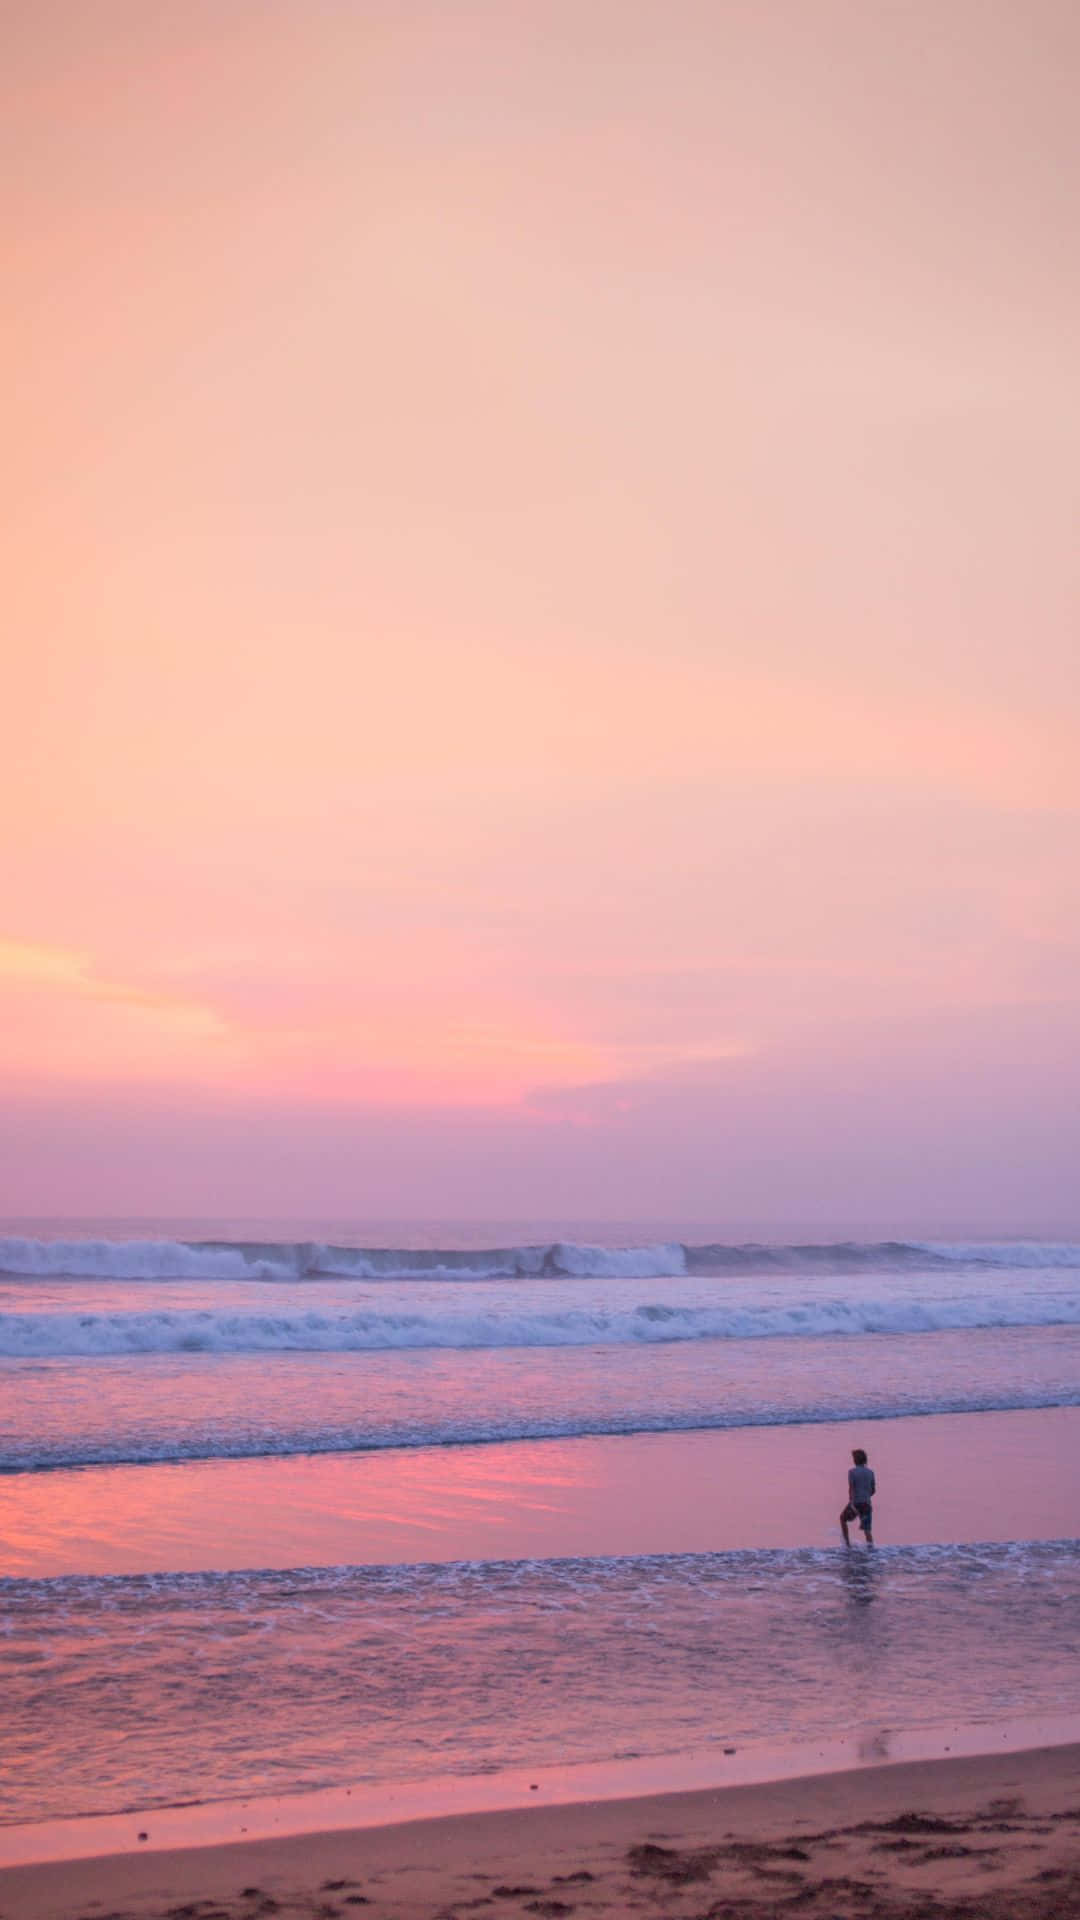 A serene afternoon at the stunning Pink Beach Wallpaper